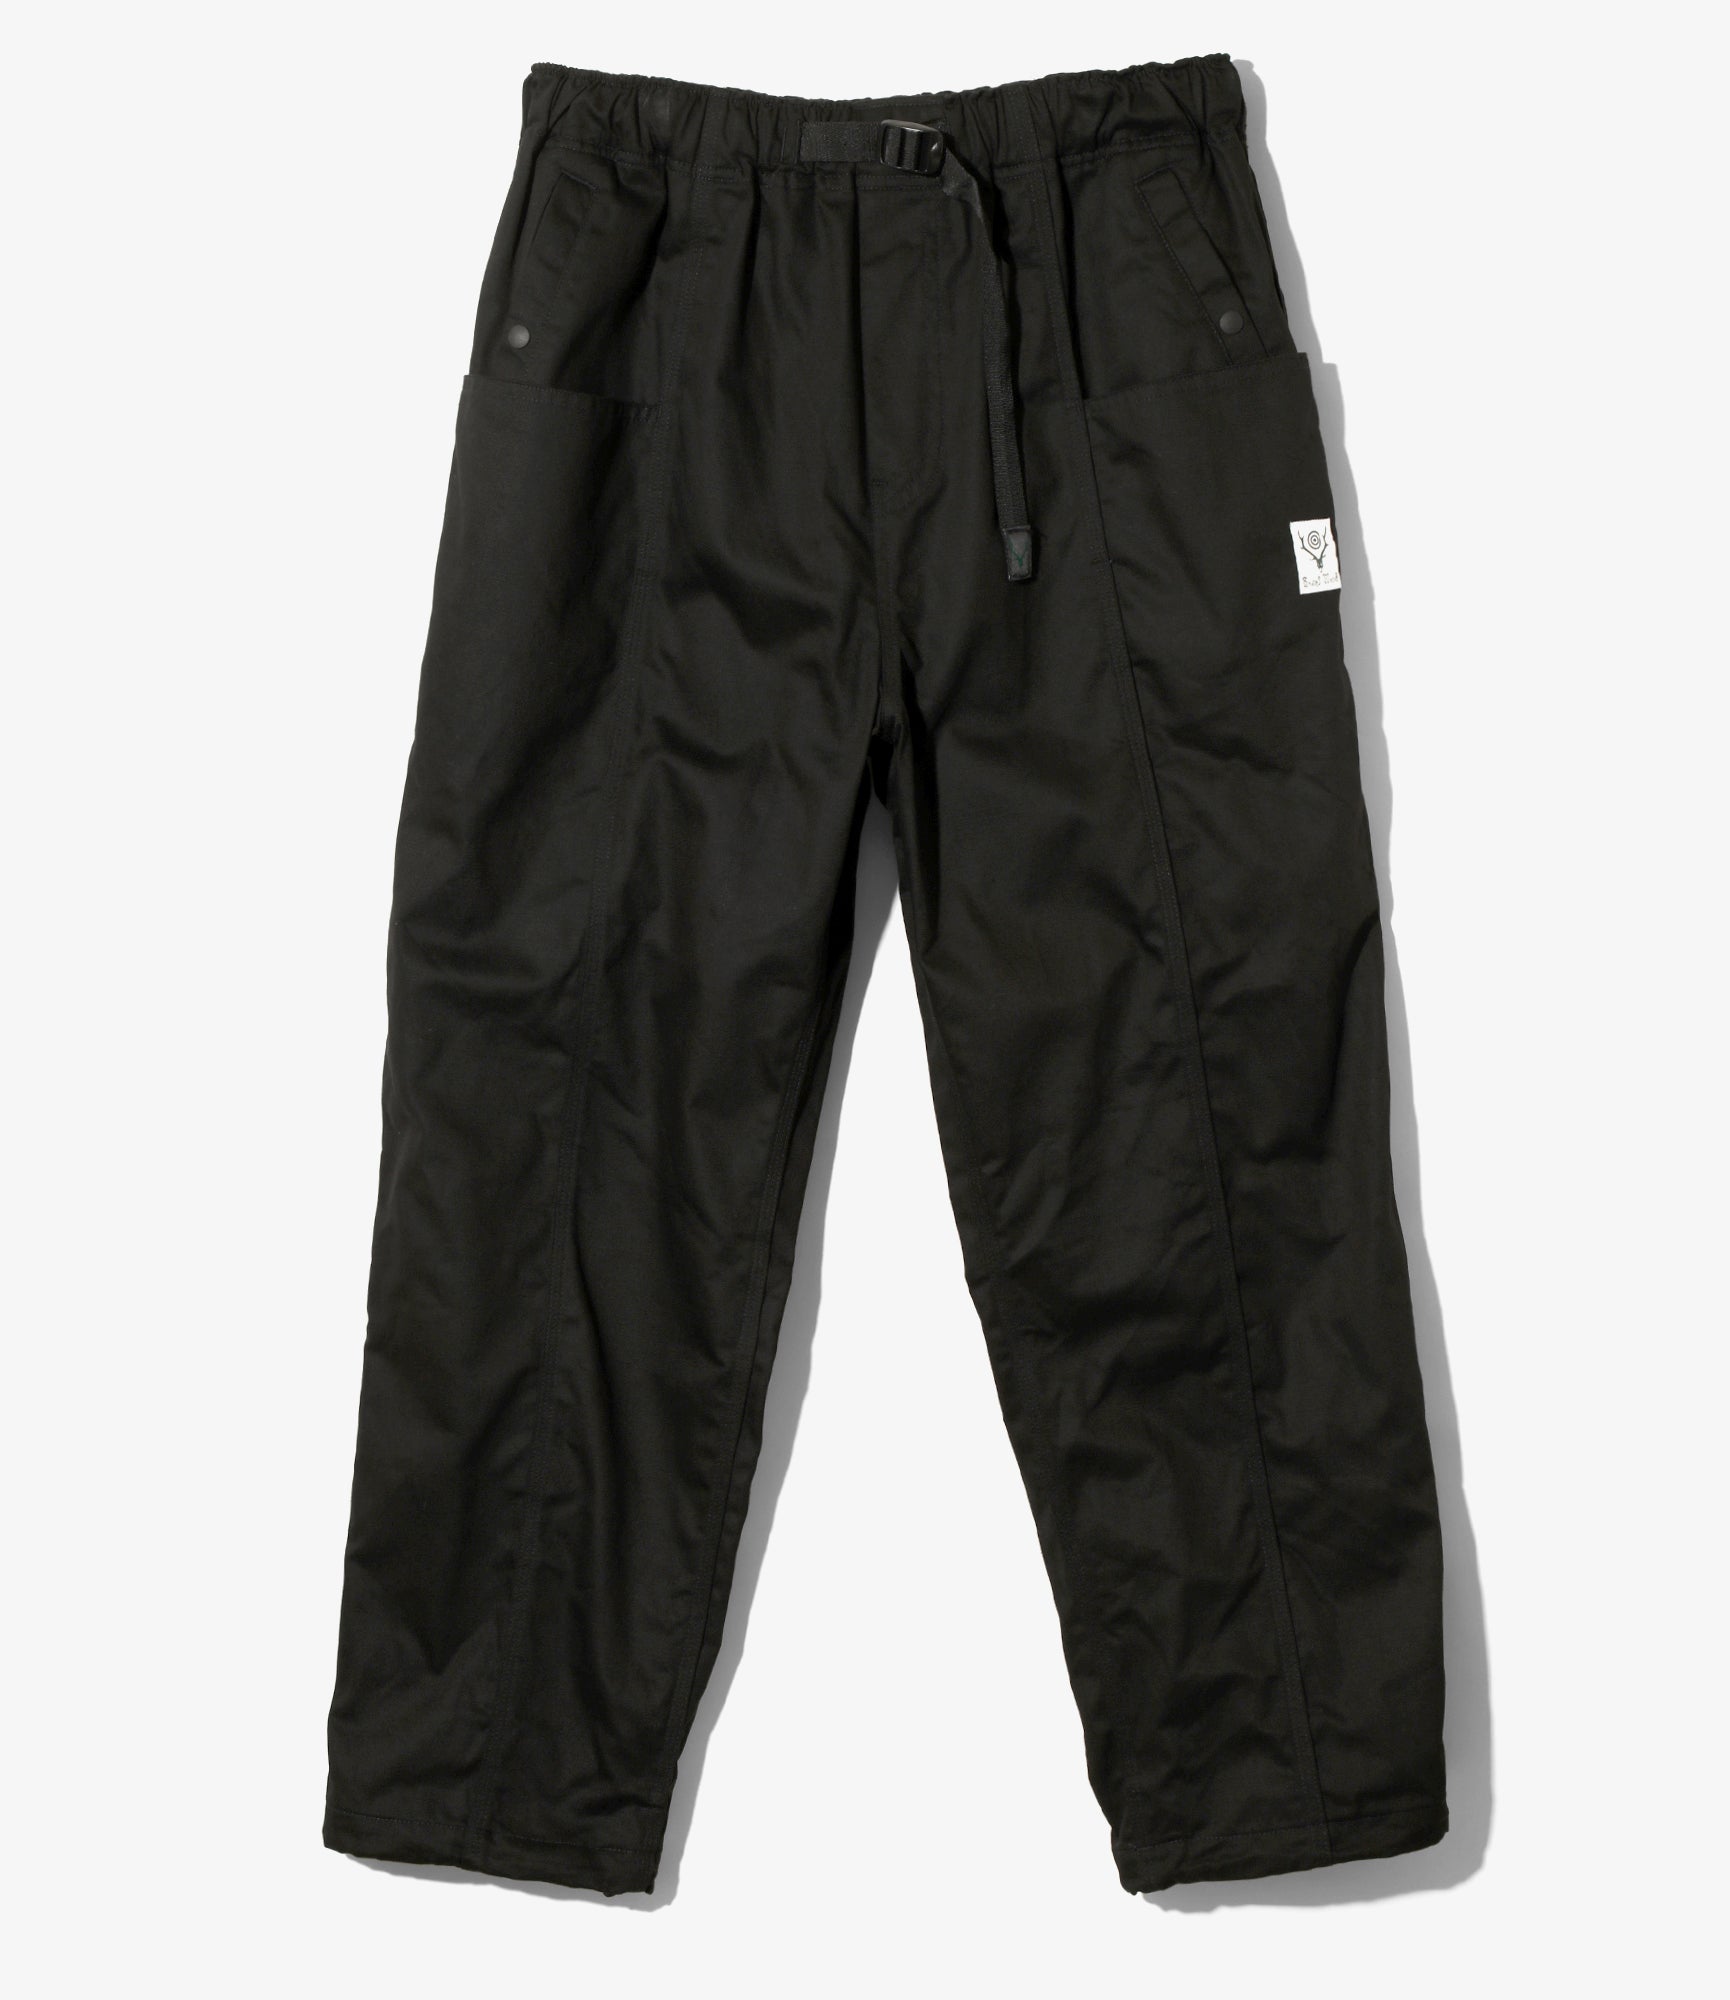 South2 West8 Belted Center Seam Pant S - ワークパンツ/カーゴパンツ